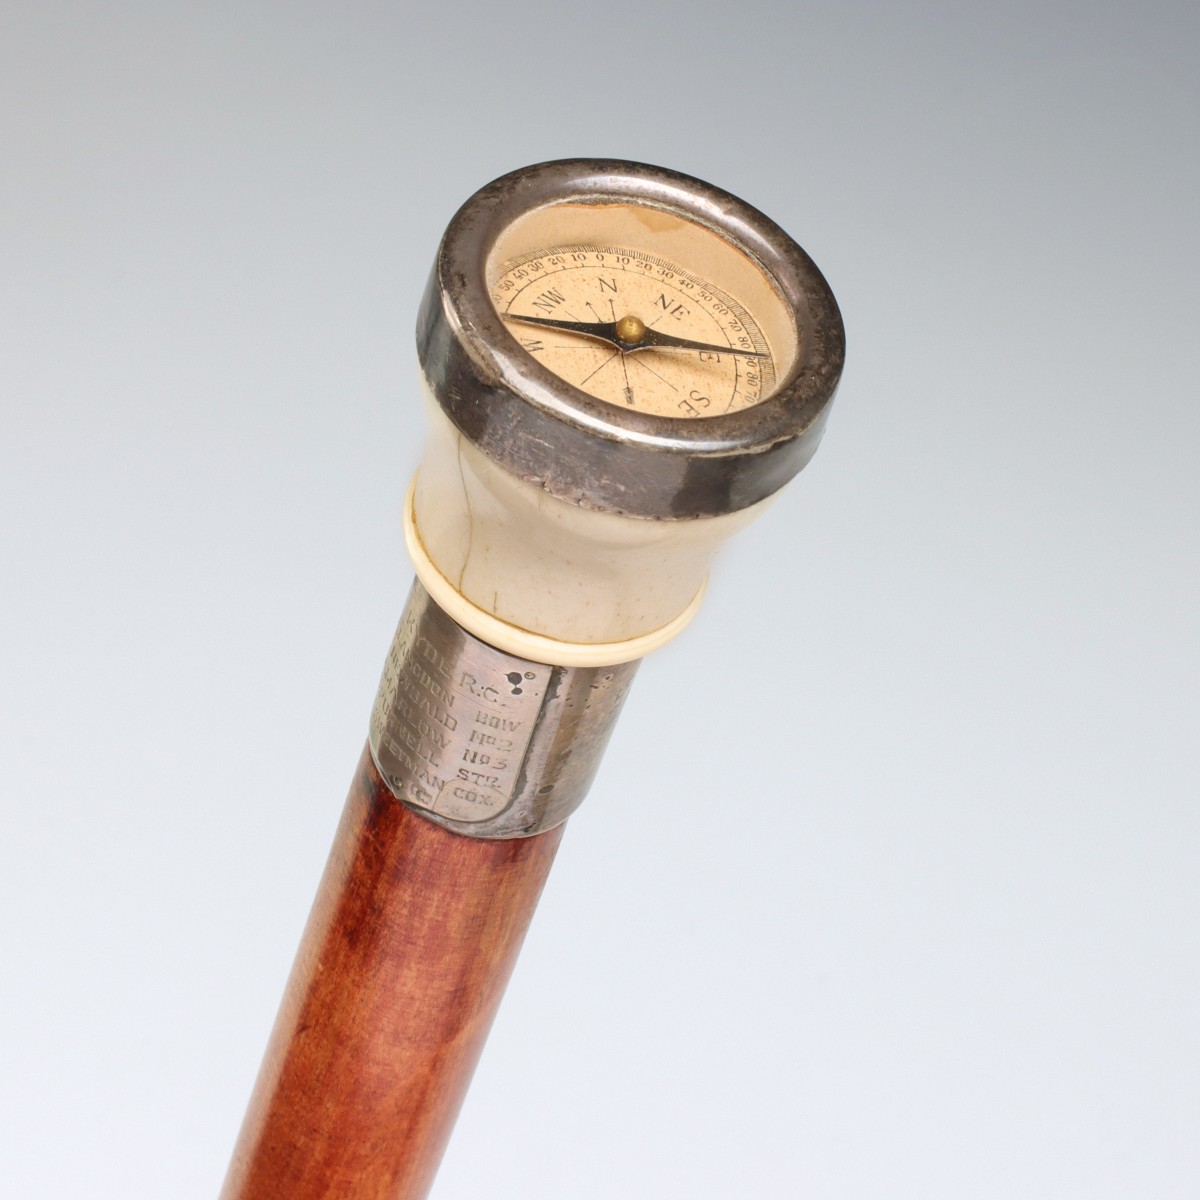 AN 1898 ROWING TEAM PRESENTATION CANE WITH COMPASS